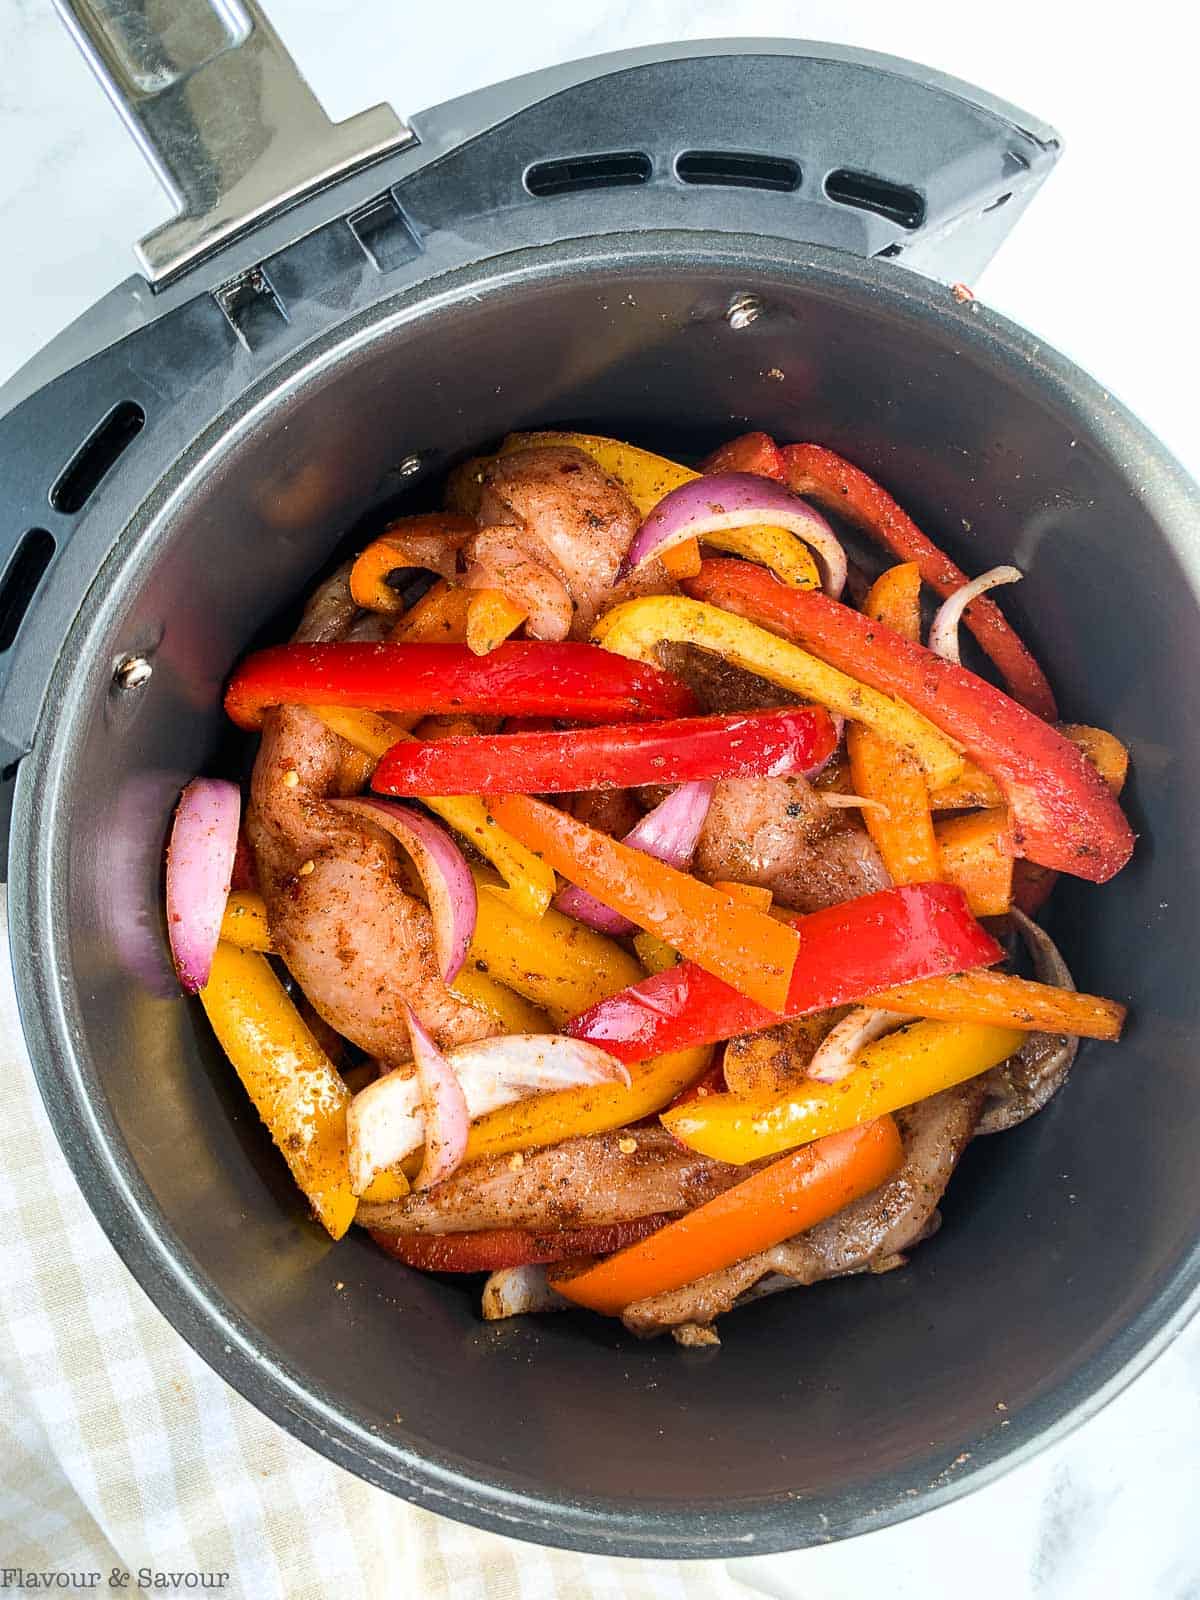 Sliced peppers and chicken in an air fryer basket.